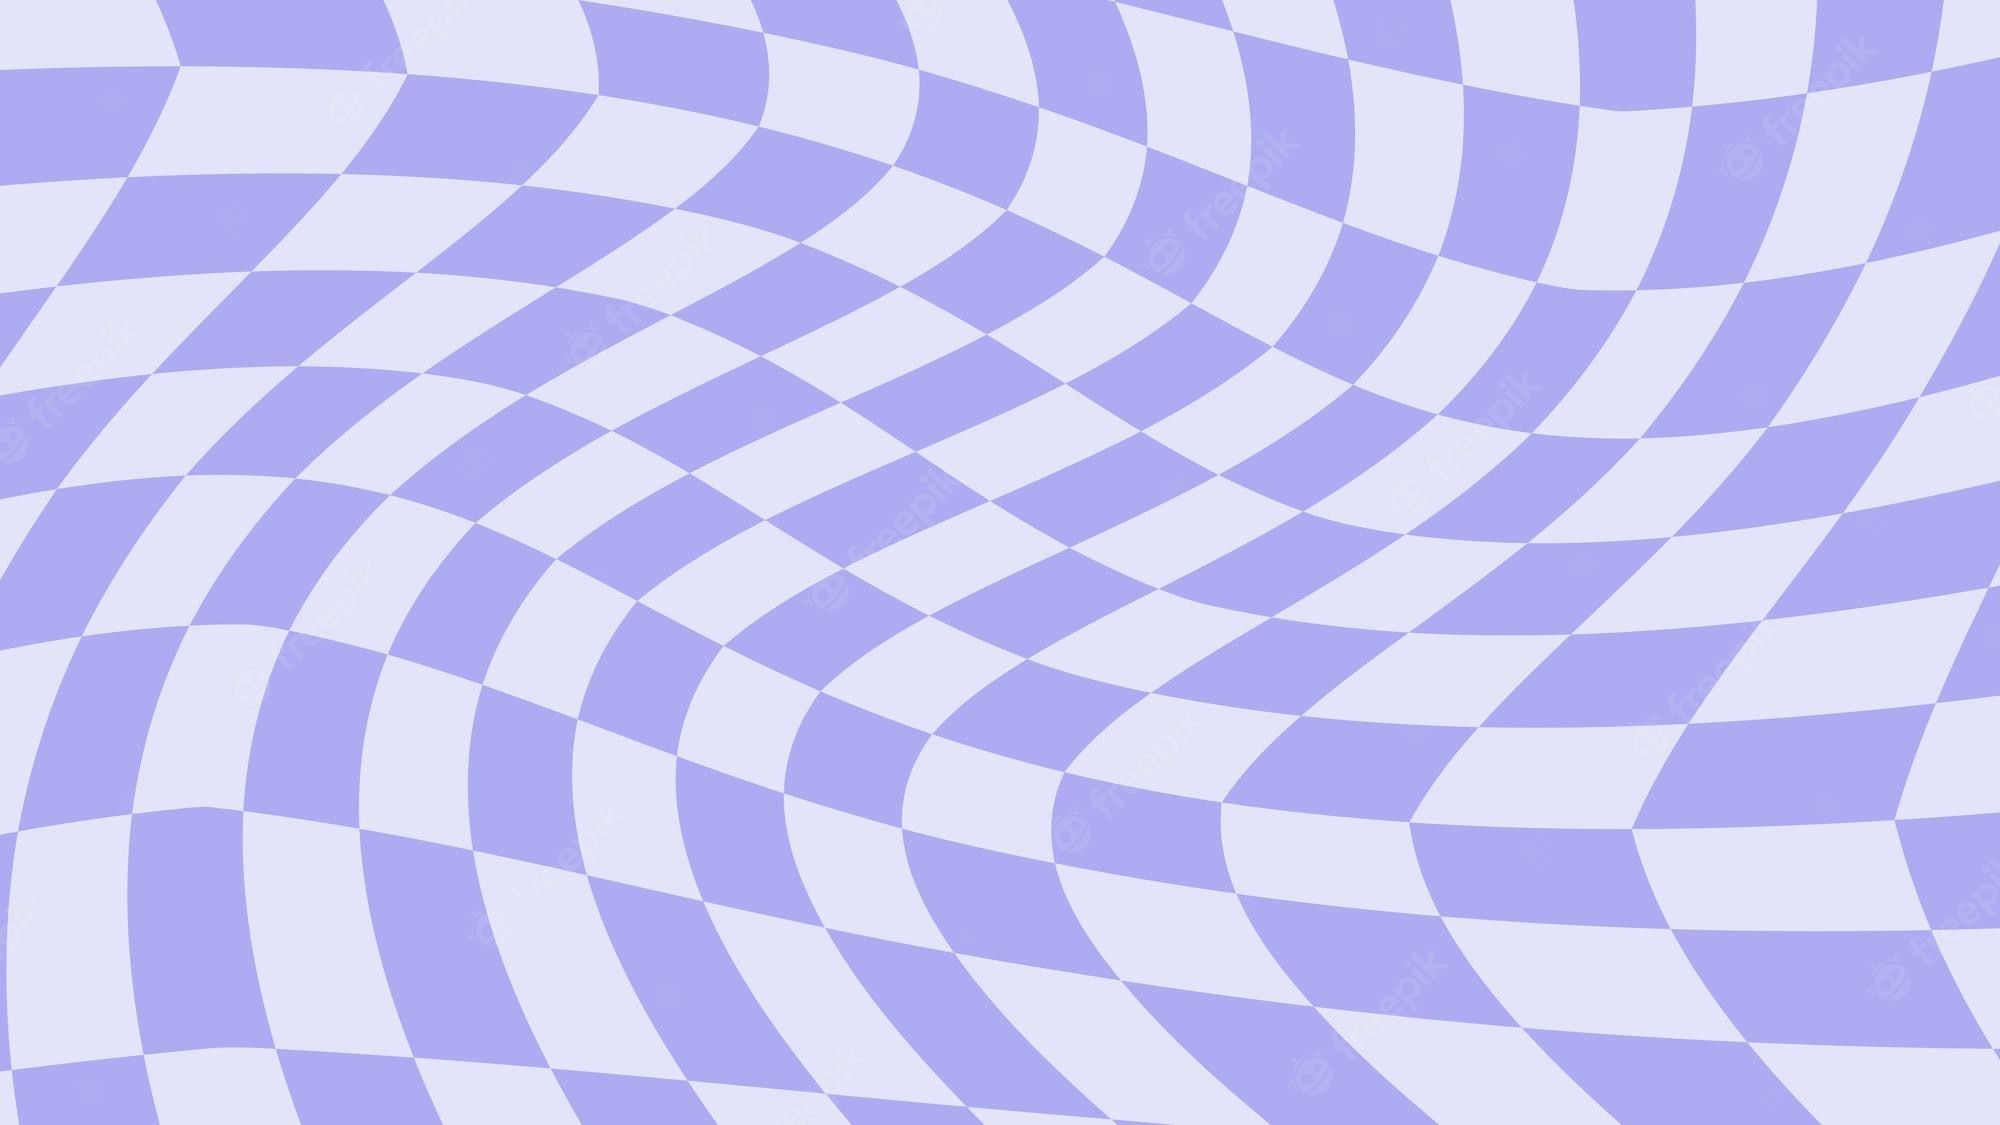 A purple and white checkered pattern with a wave effect - Pastel purple